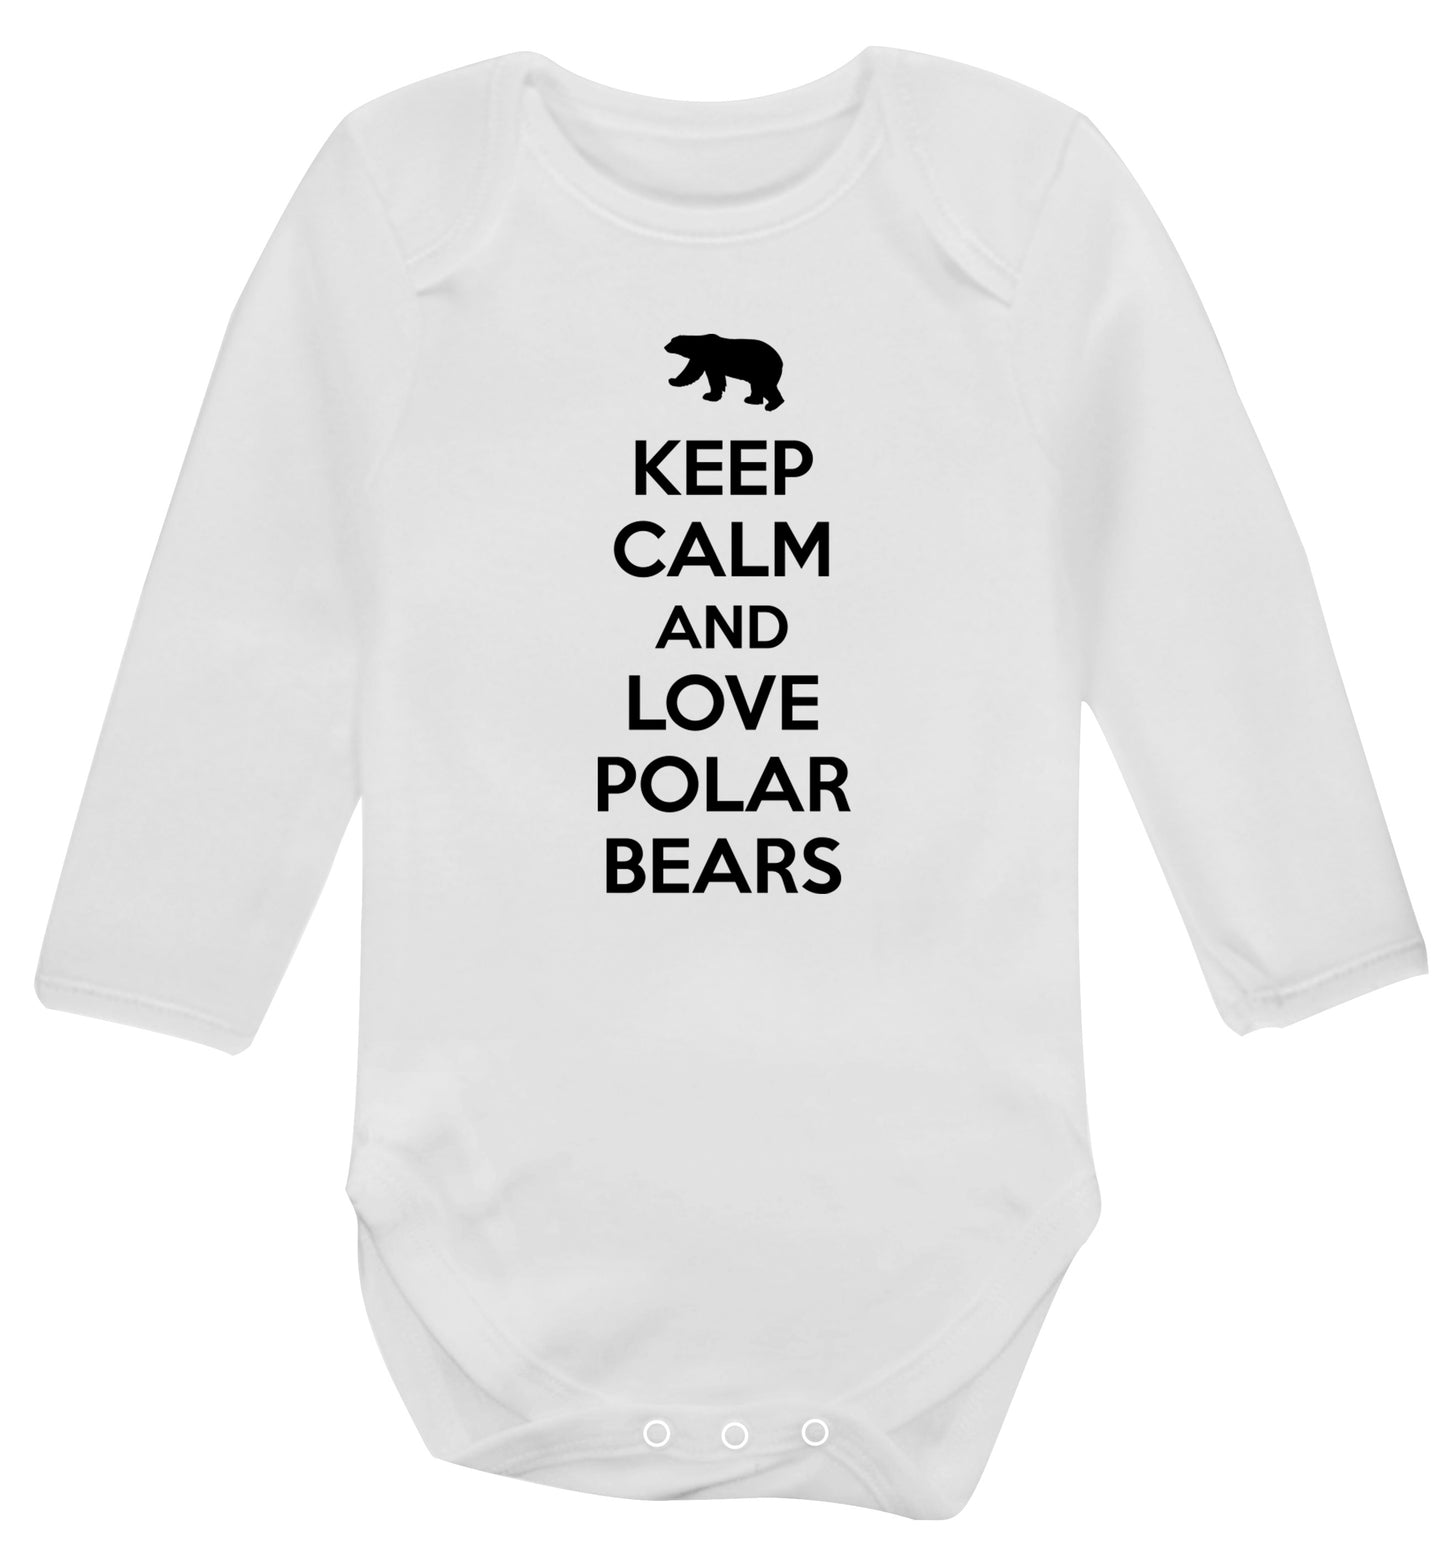 Keep calm and love polar bears Baby Vest long sleeved white 6-12 months